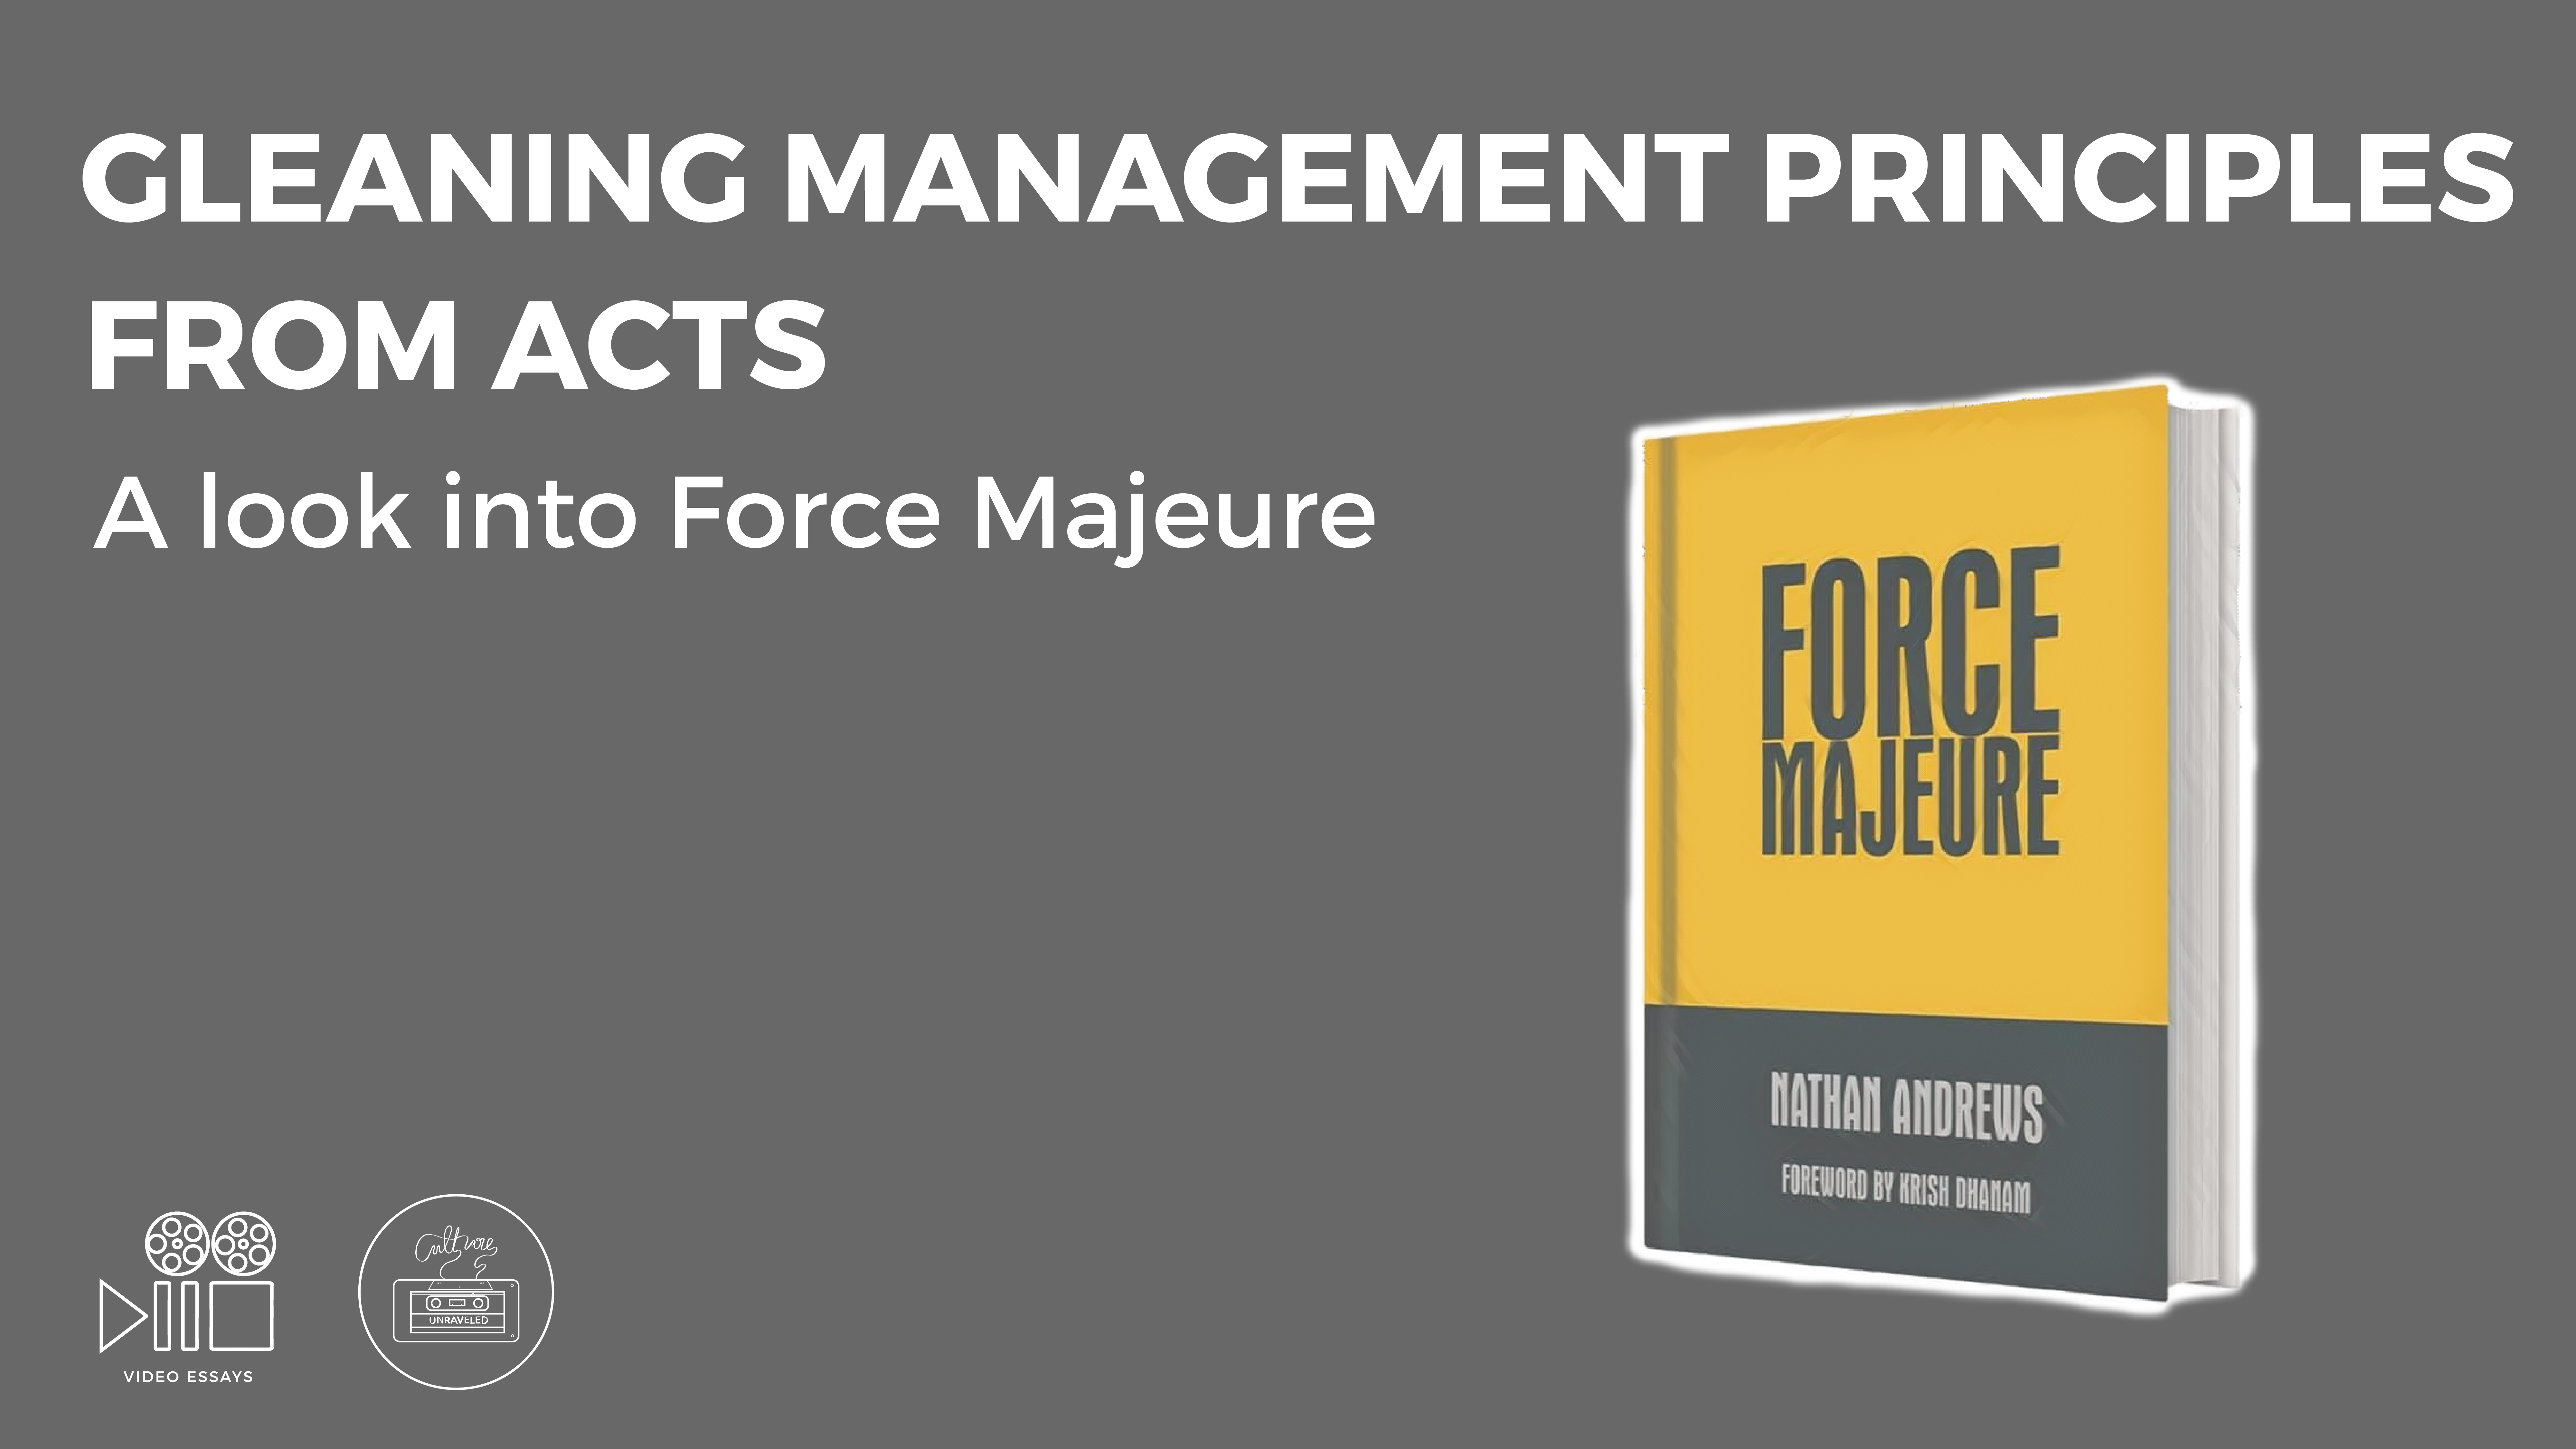 Gleaning Management Principles from Acts – A Look into Force Majeure